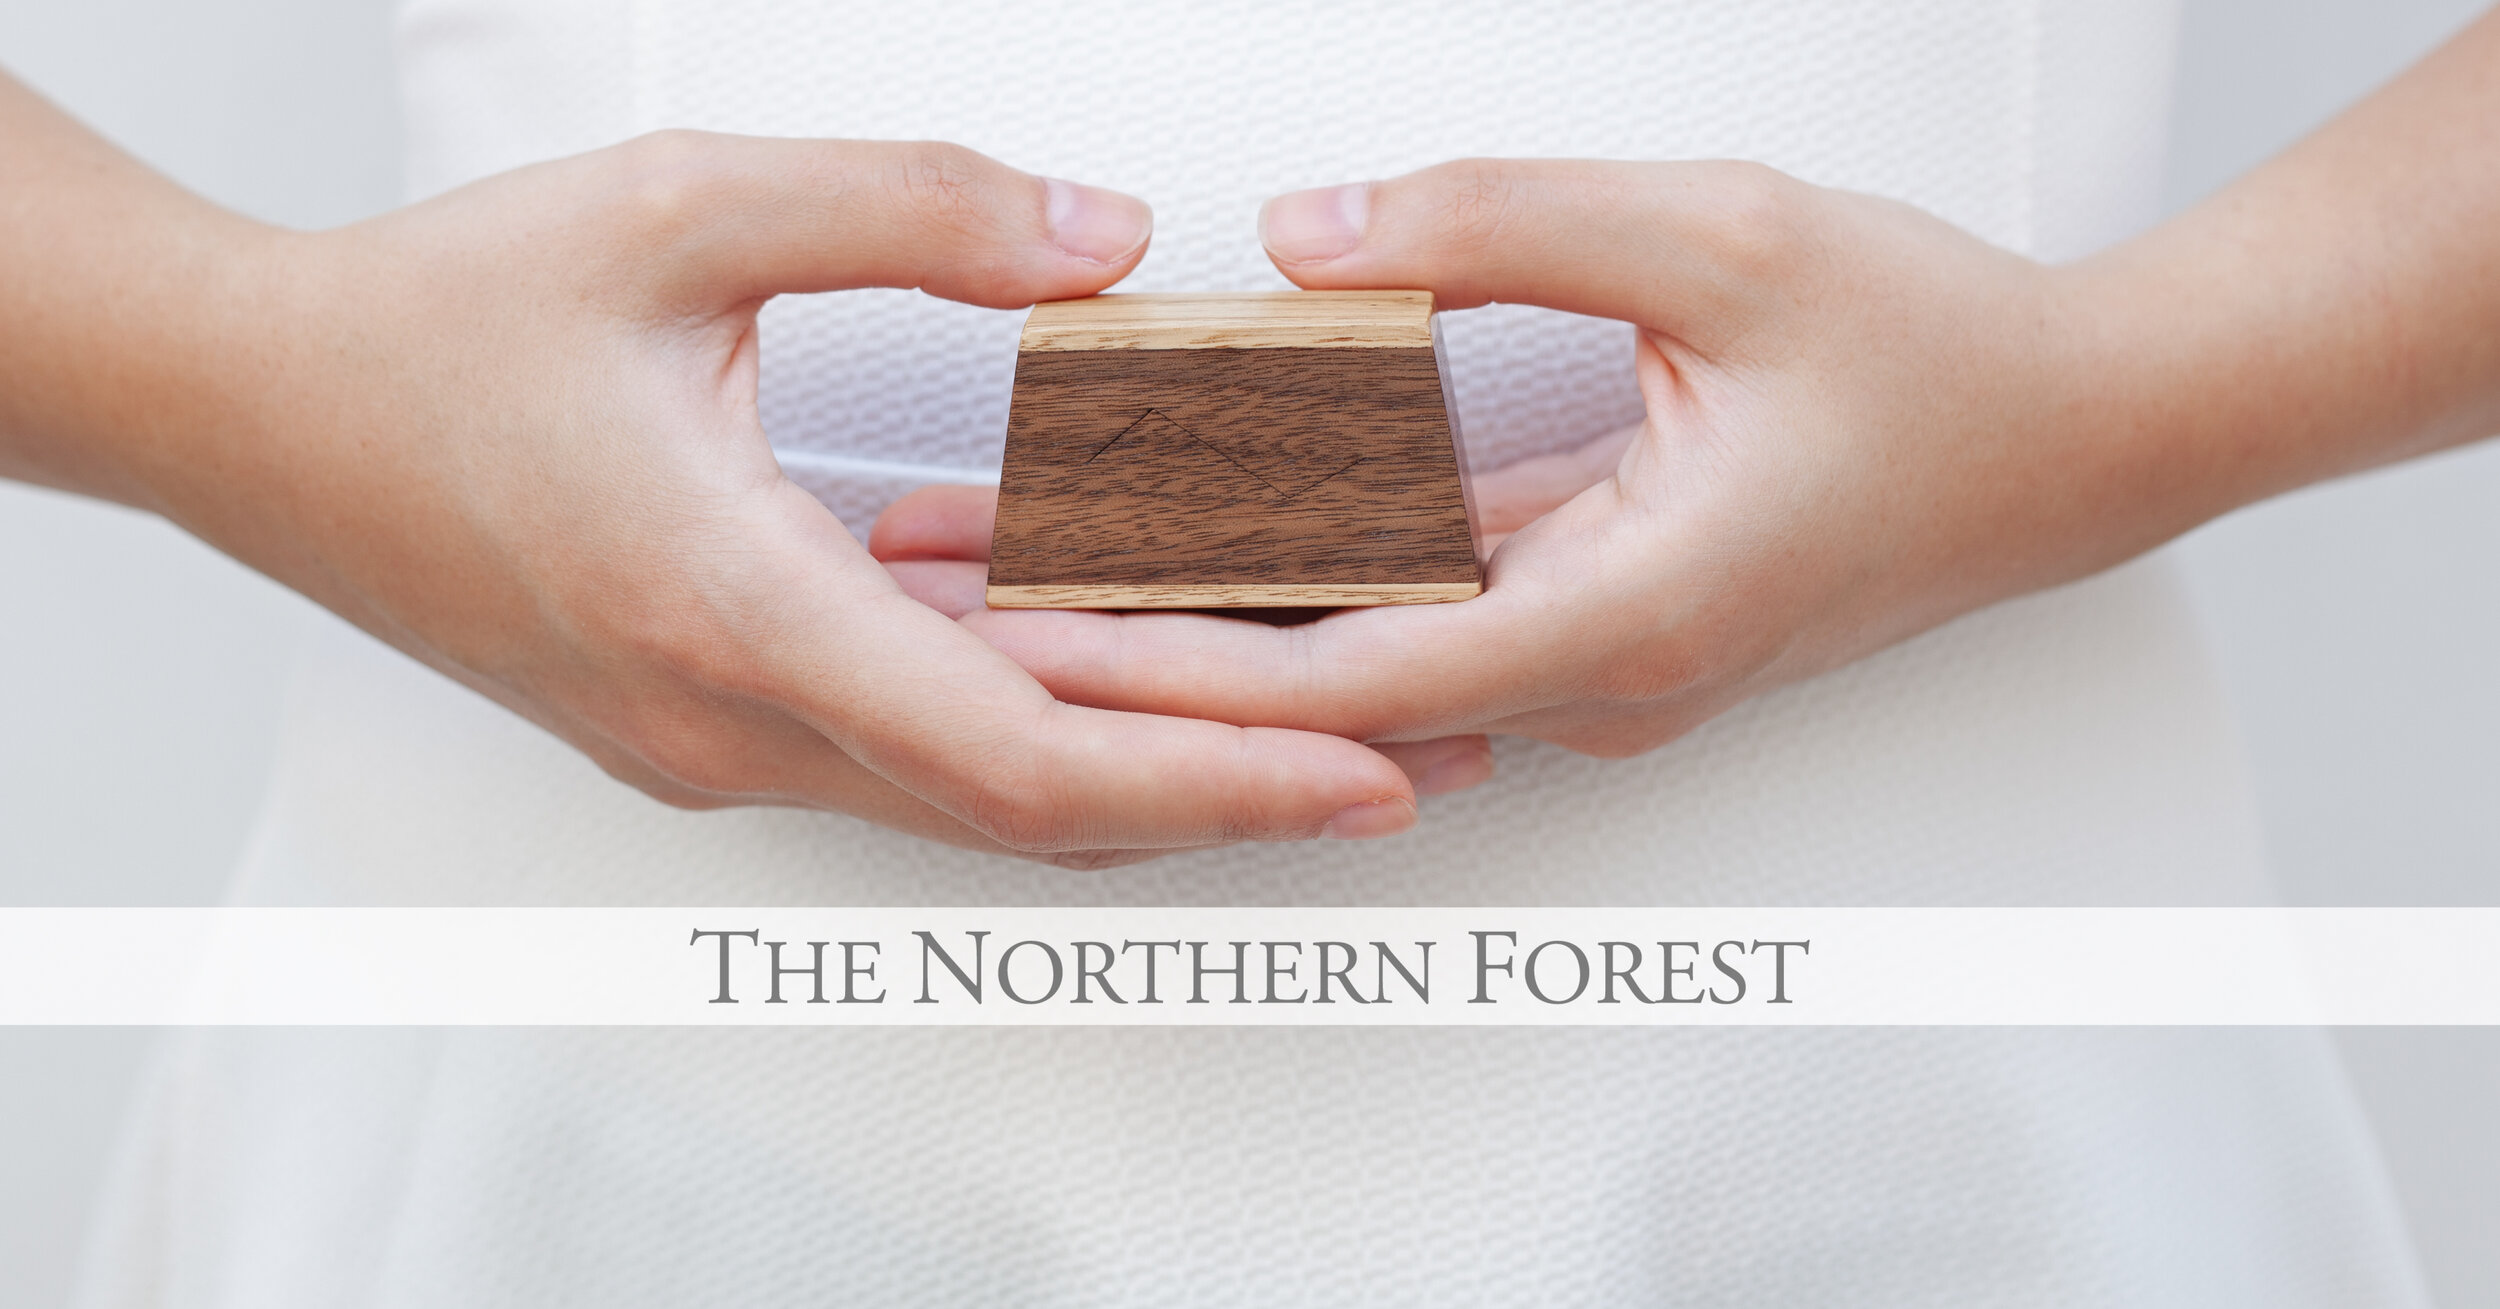 THE NORTHERN FOREST